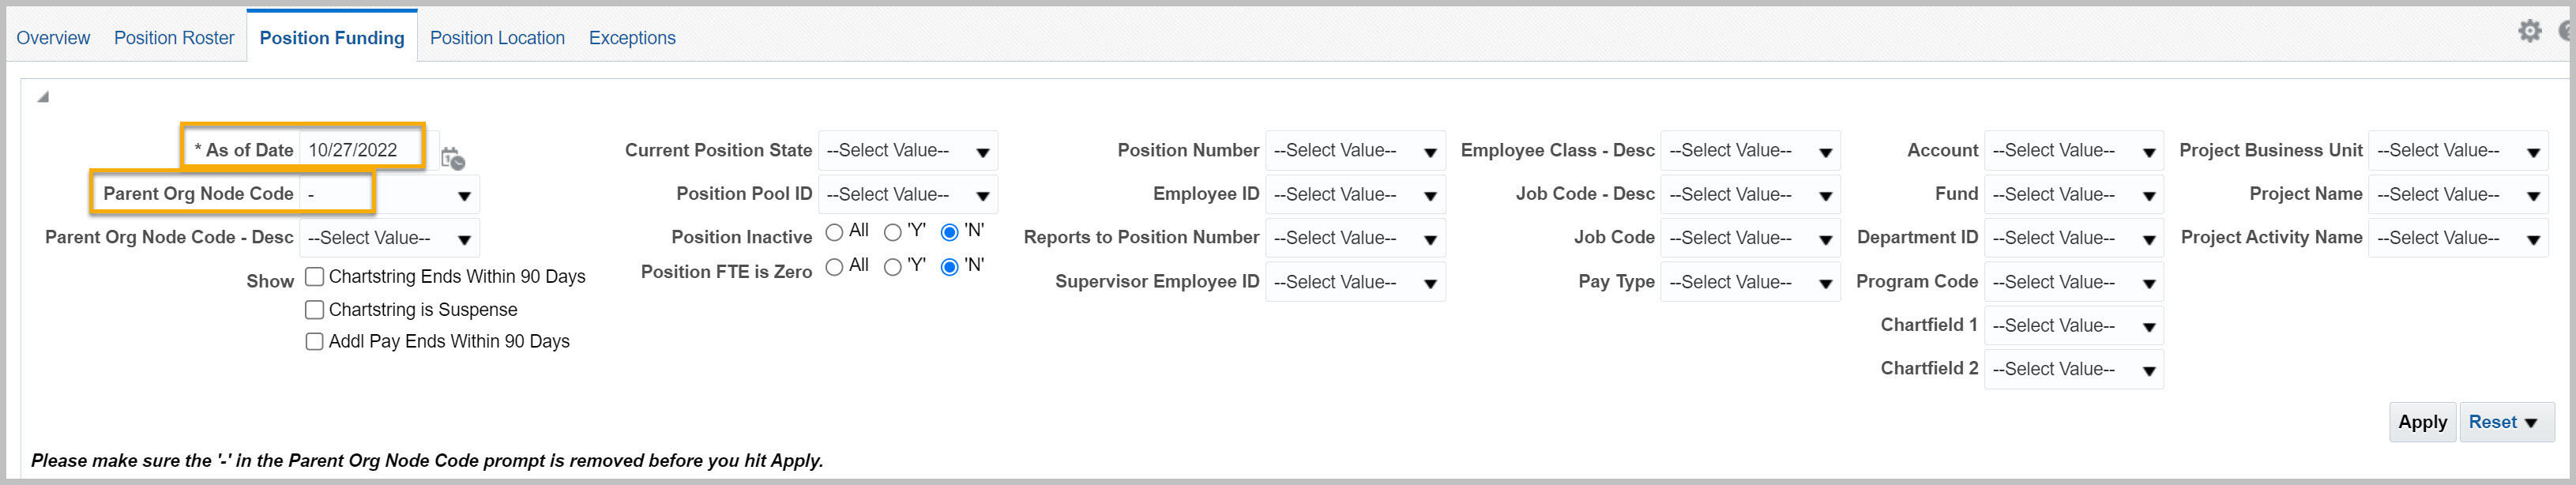 Position Management dashboard Position Funding report filters